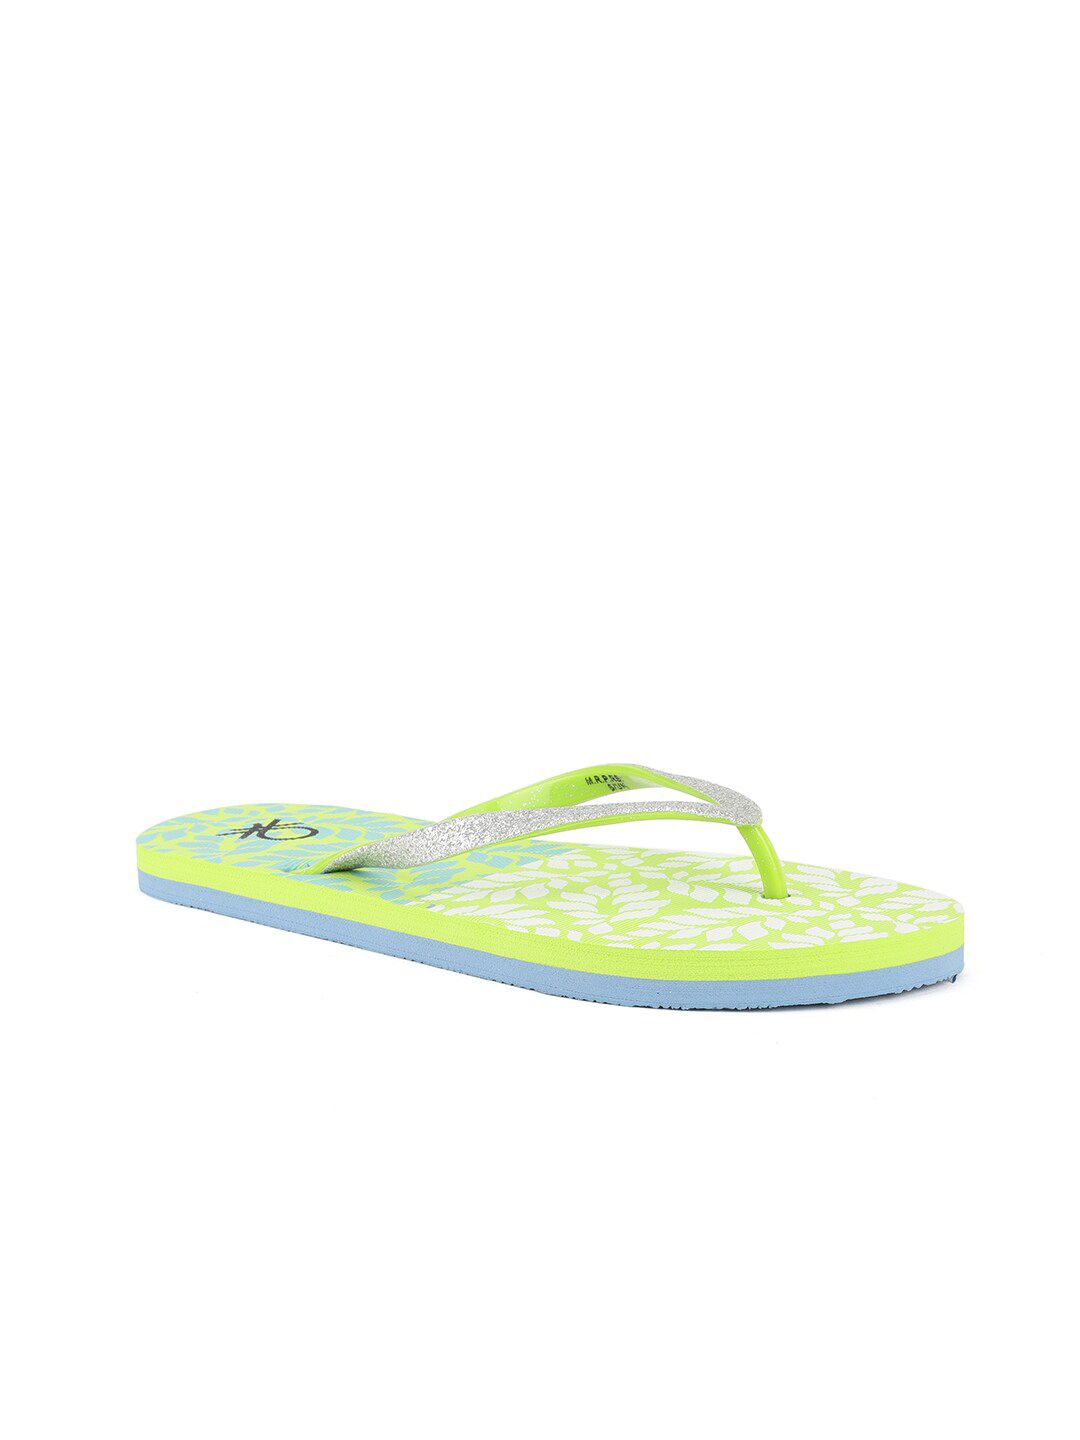 United Colors of Benetton Women Green Printed Rubber Thong Flip-Flops Price in India